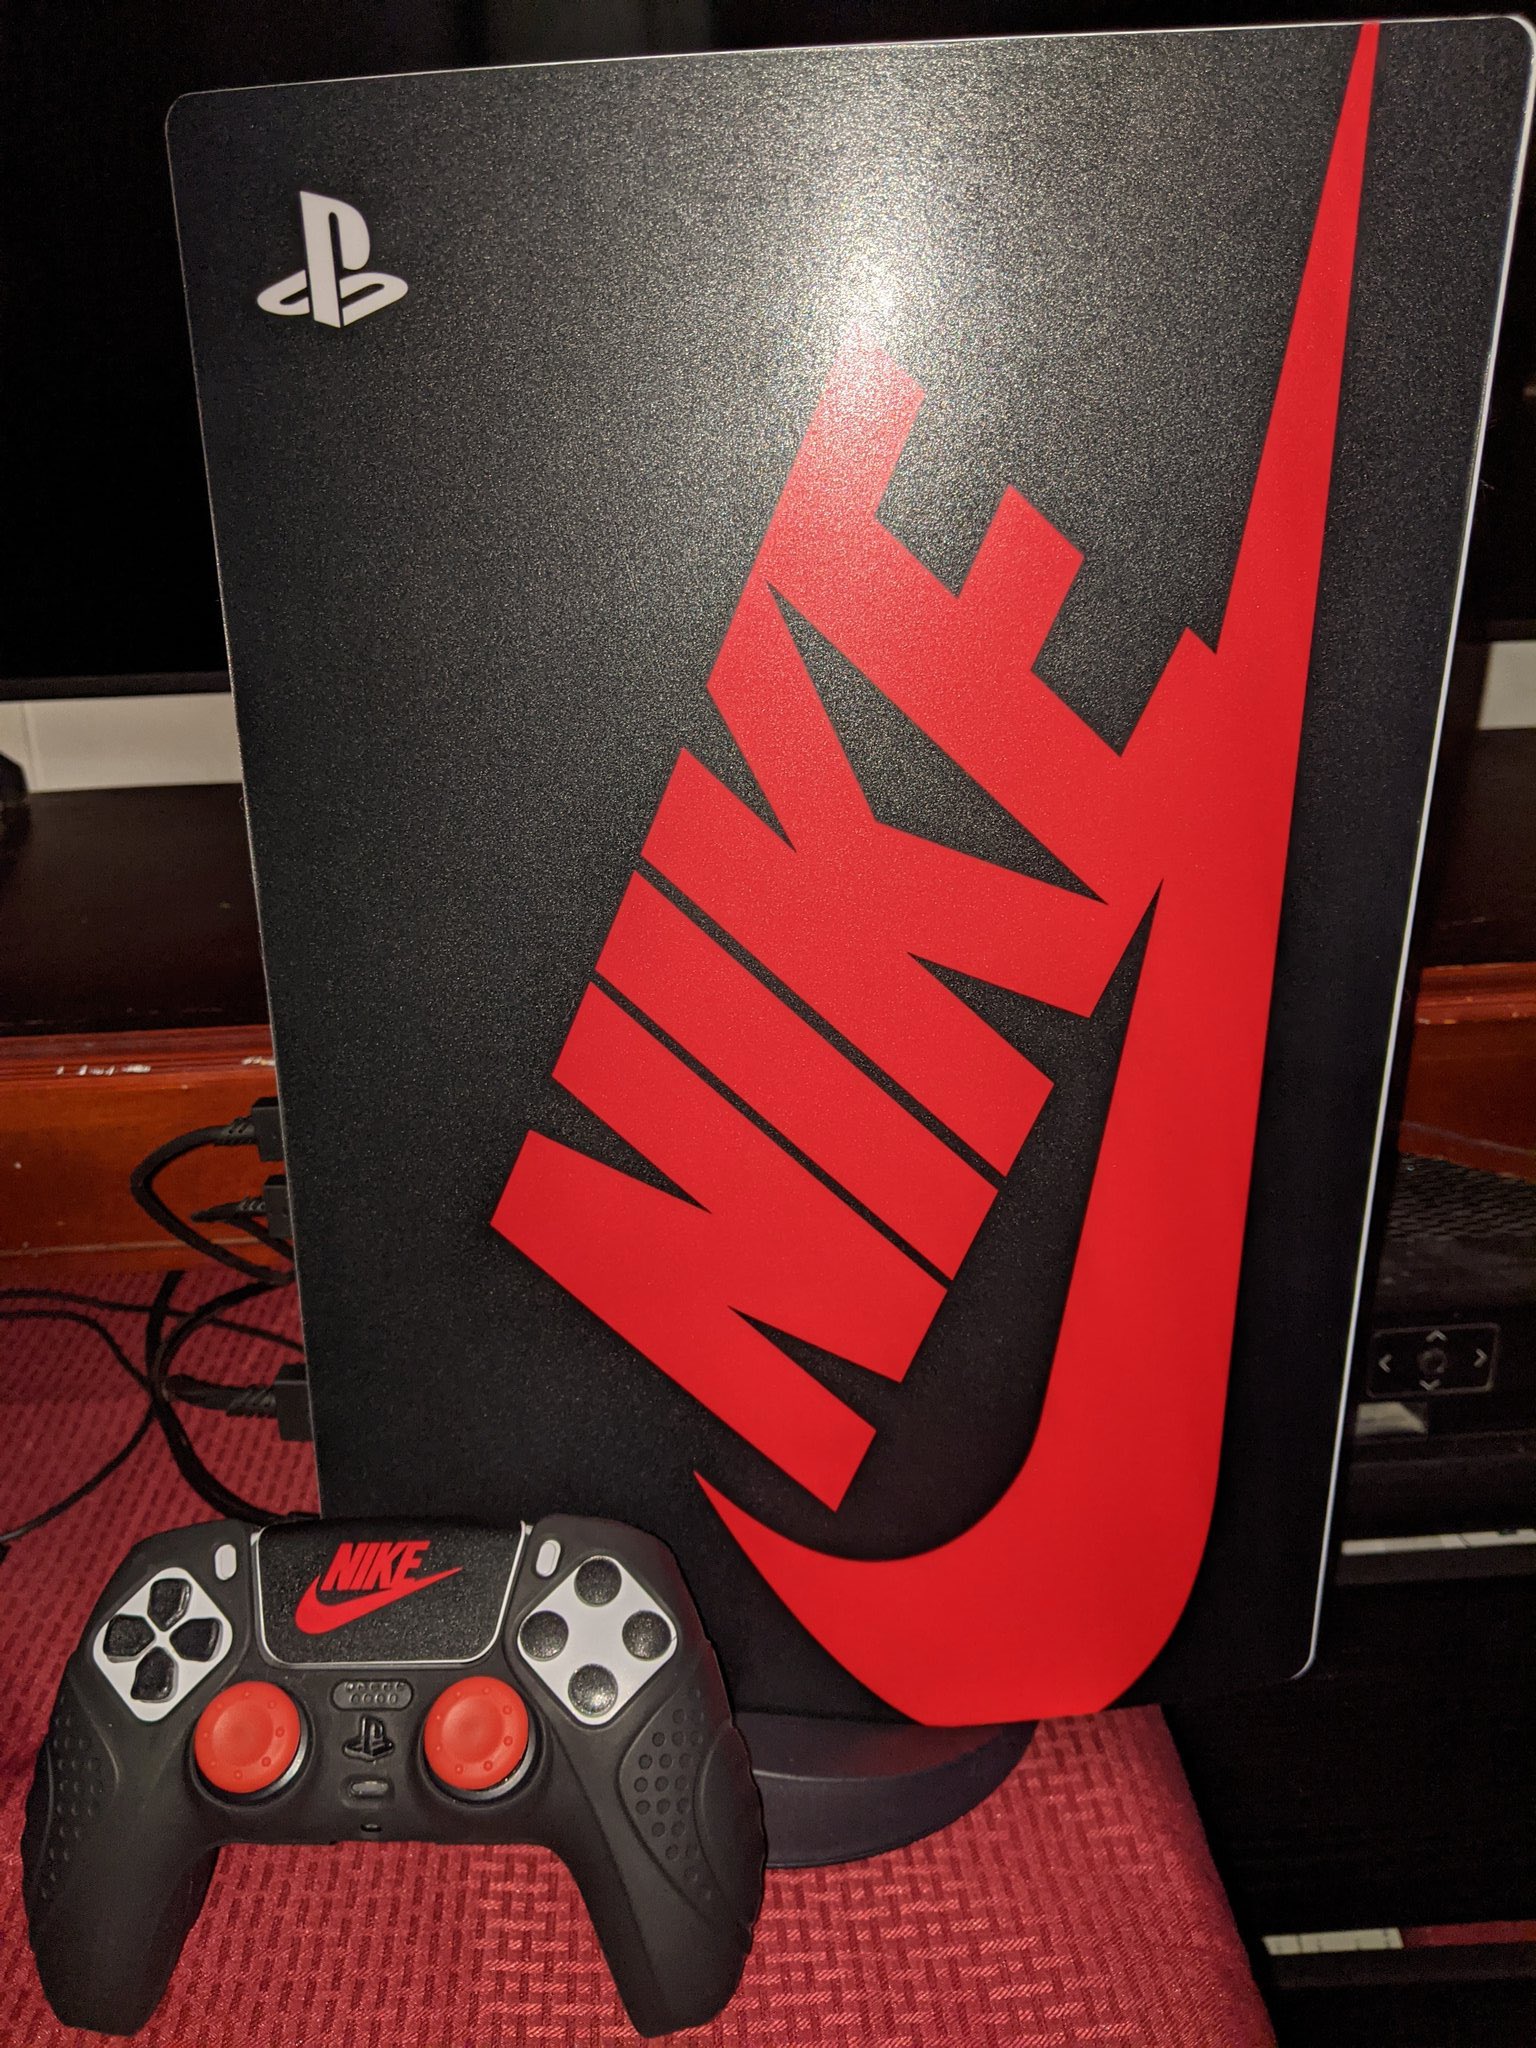 Twitter 上的SLAM Gaming："This black Nike PS5 skin might be cooler than the  red one 🔥 (via @Luis25118274) https://t.co/tbLfNNbSUi" / Twitter